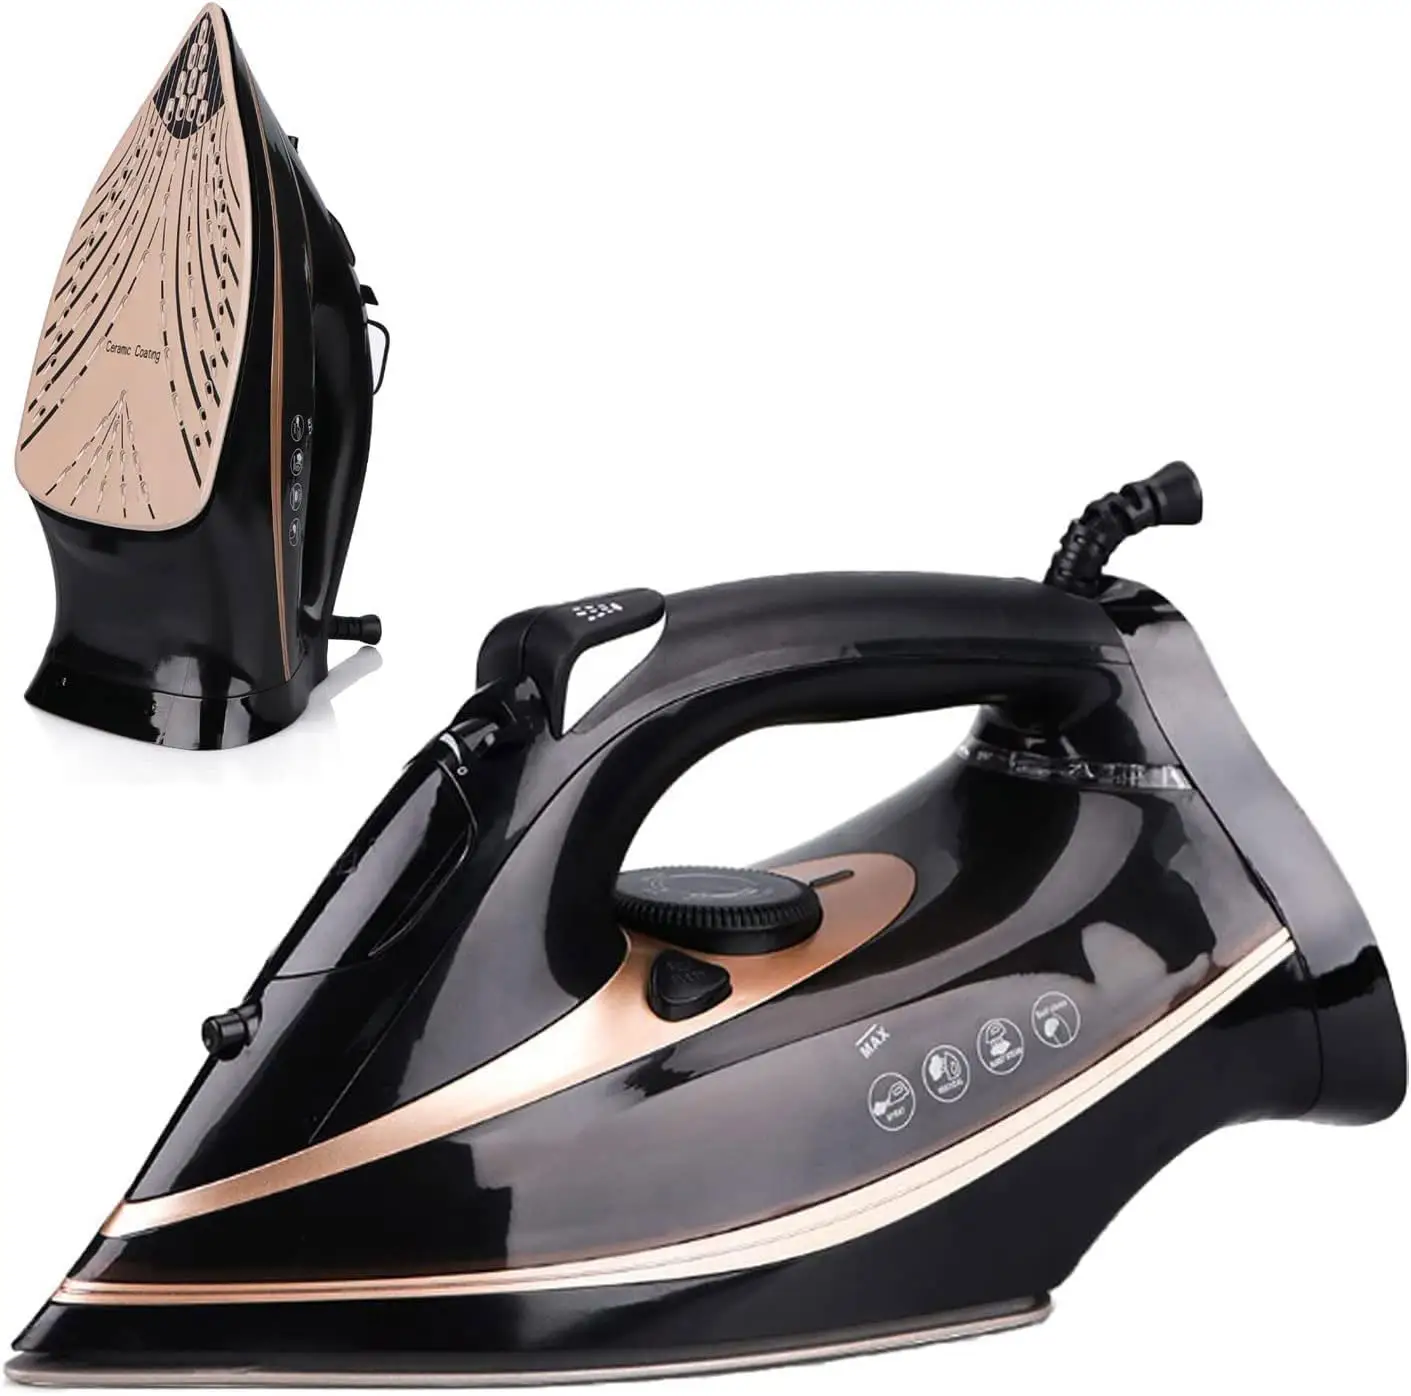 2200W 2400W 2600W 3000W Steam Iron with ceramic soleplate Portable Steam Ironing Machine Garment care electric Clothes Iron